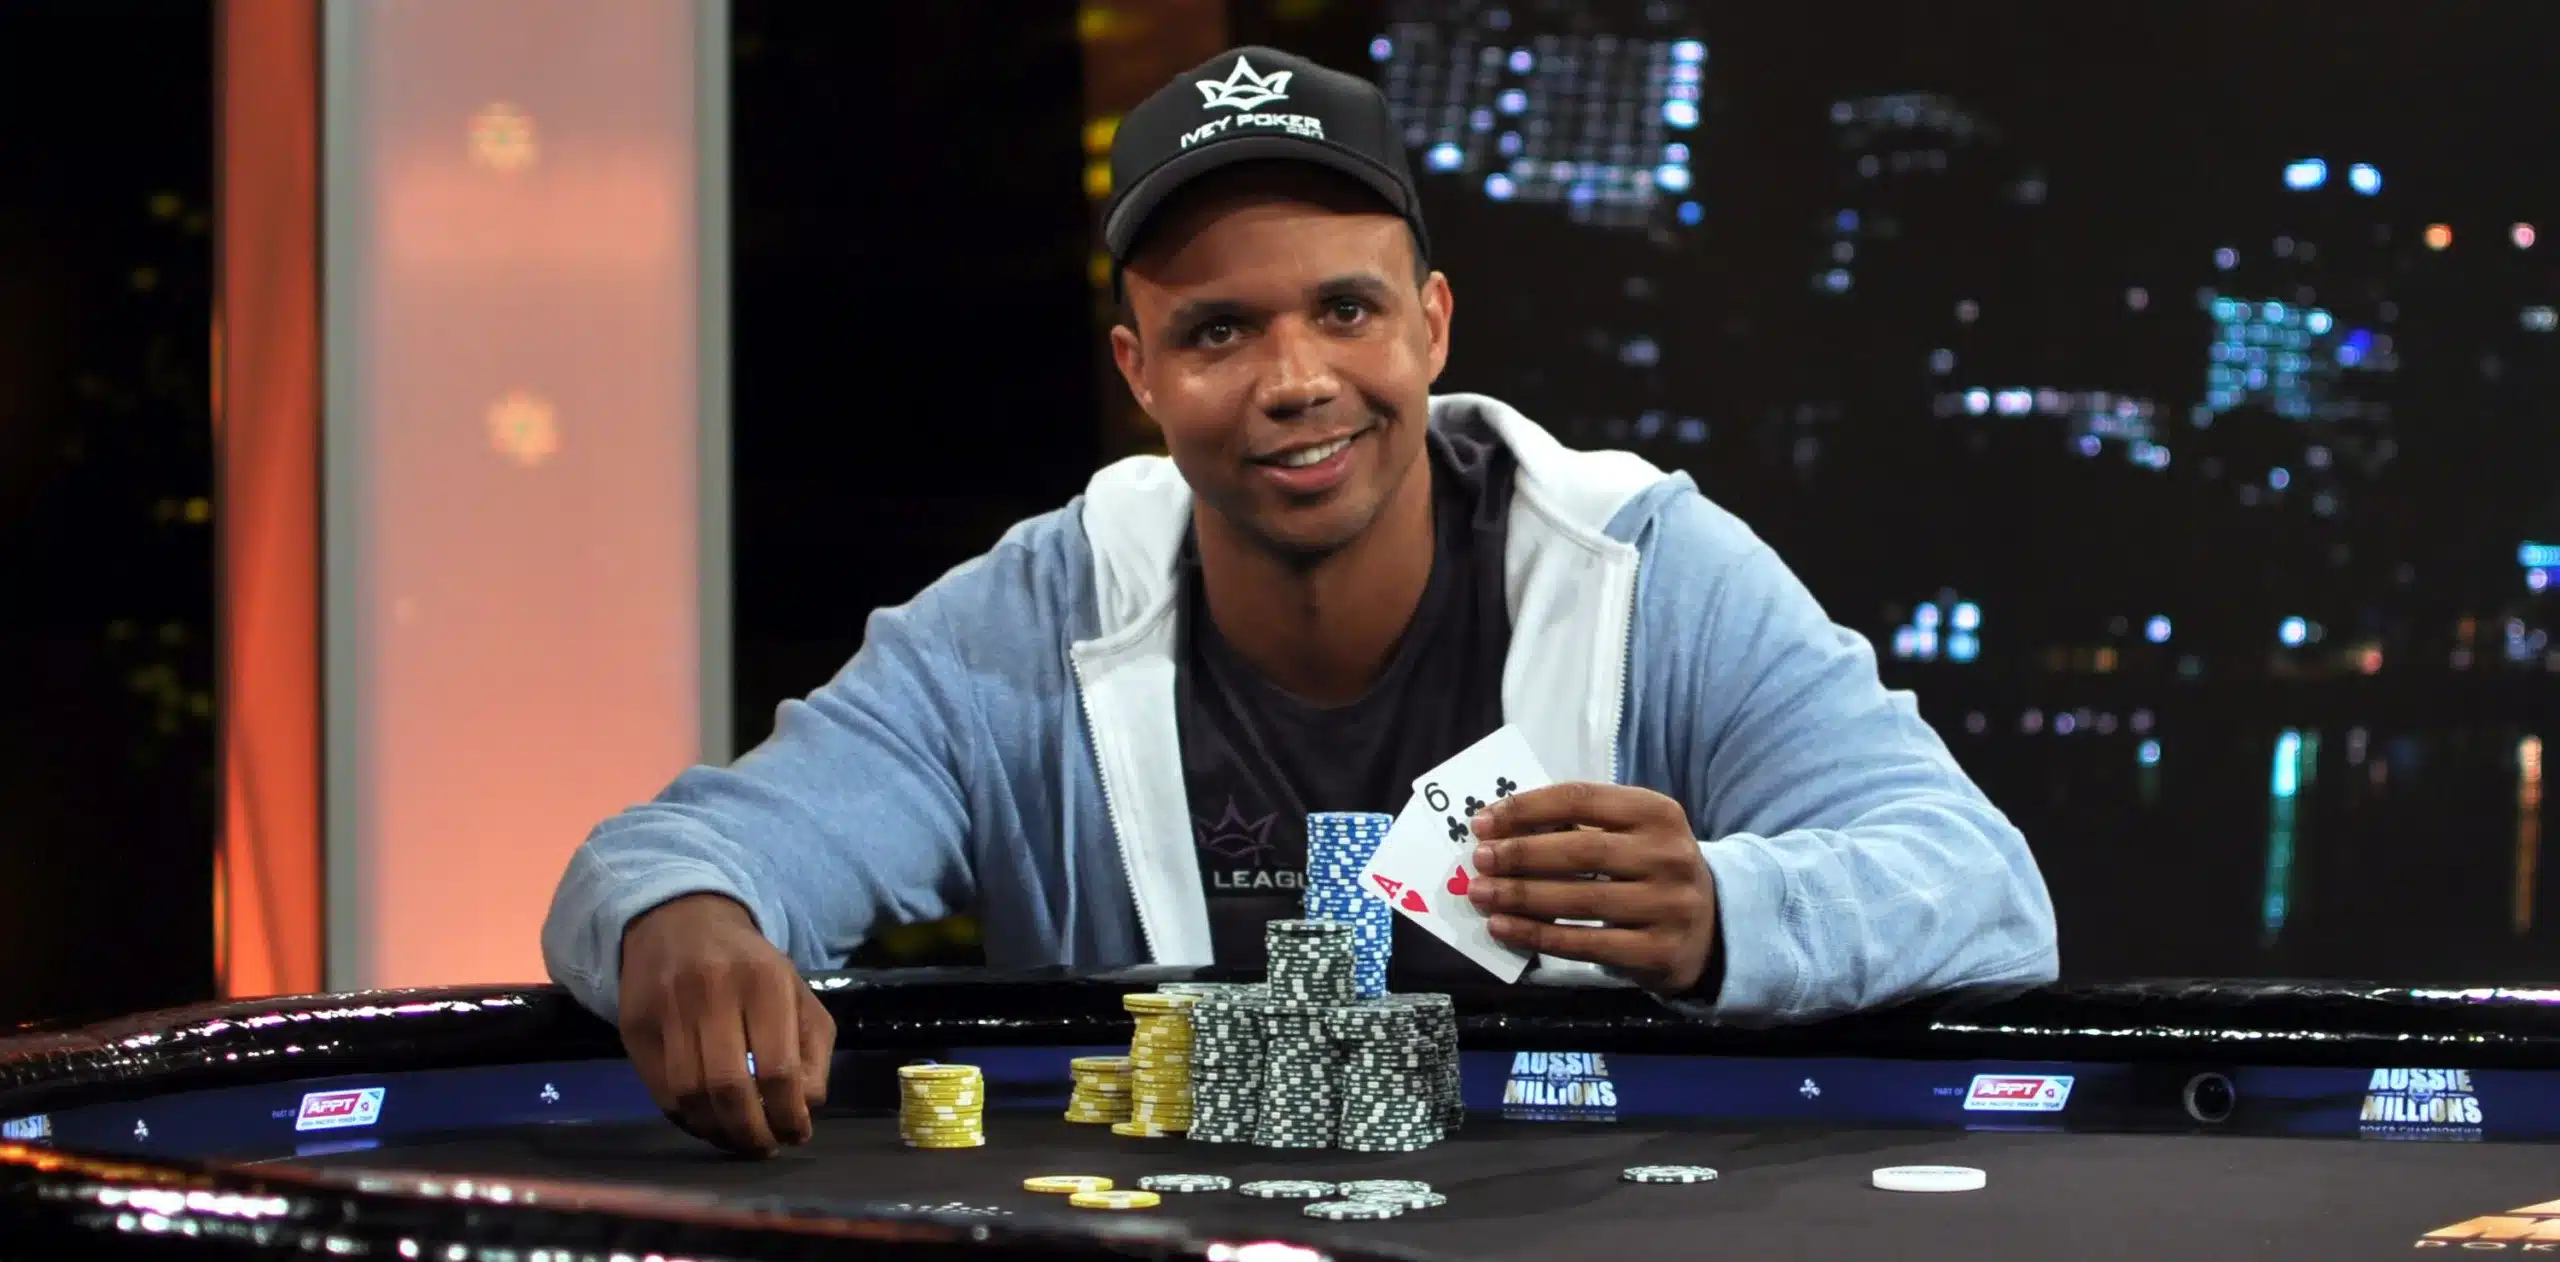 Biography of phil ivey